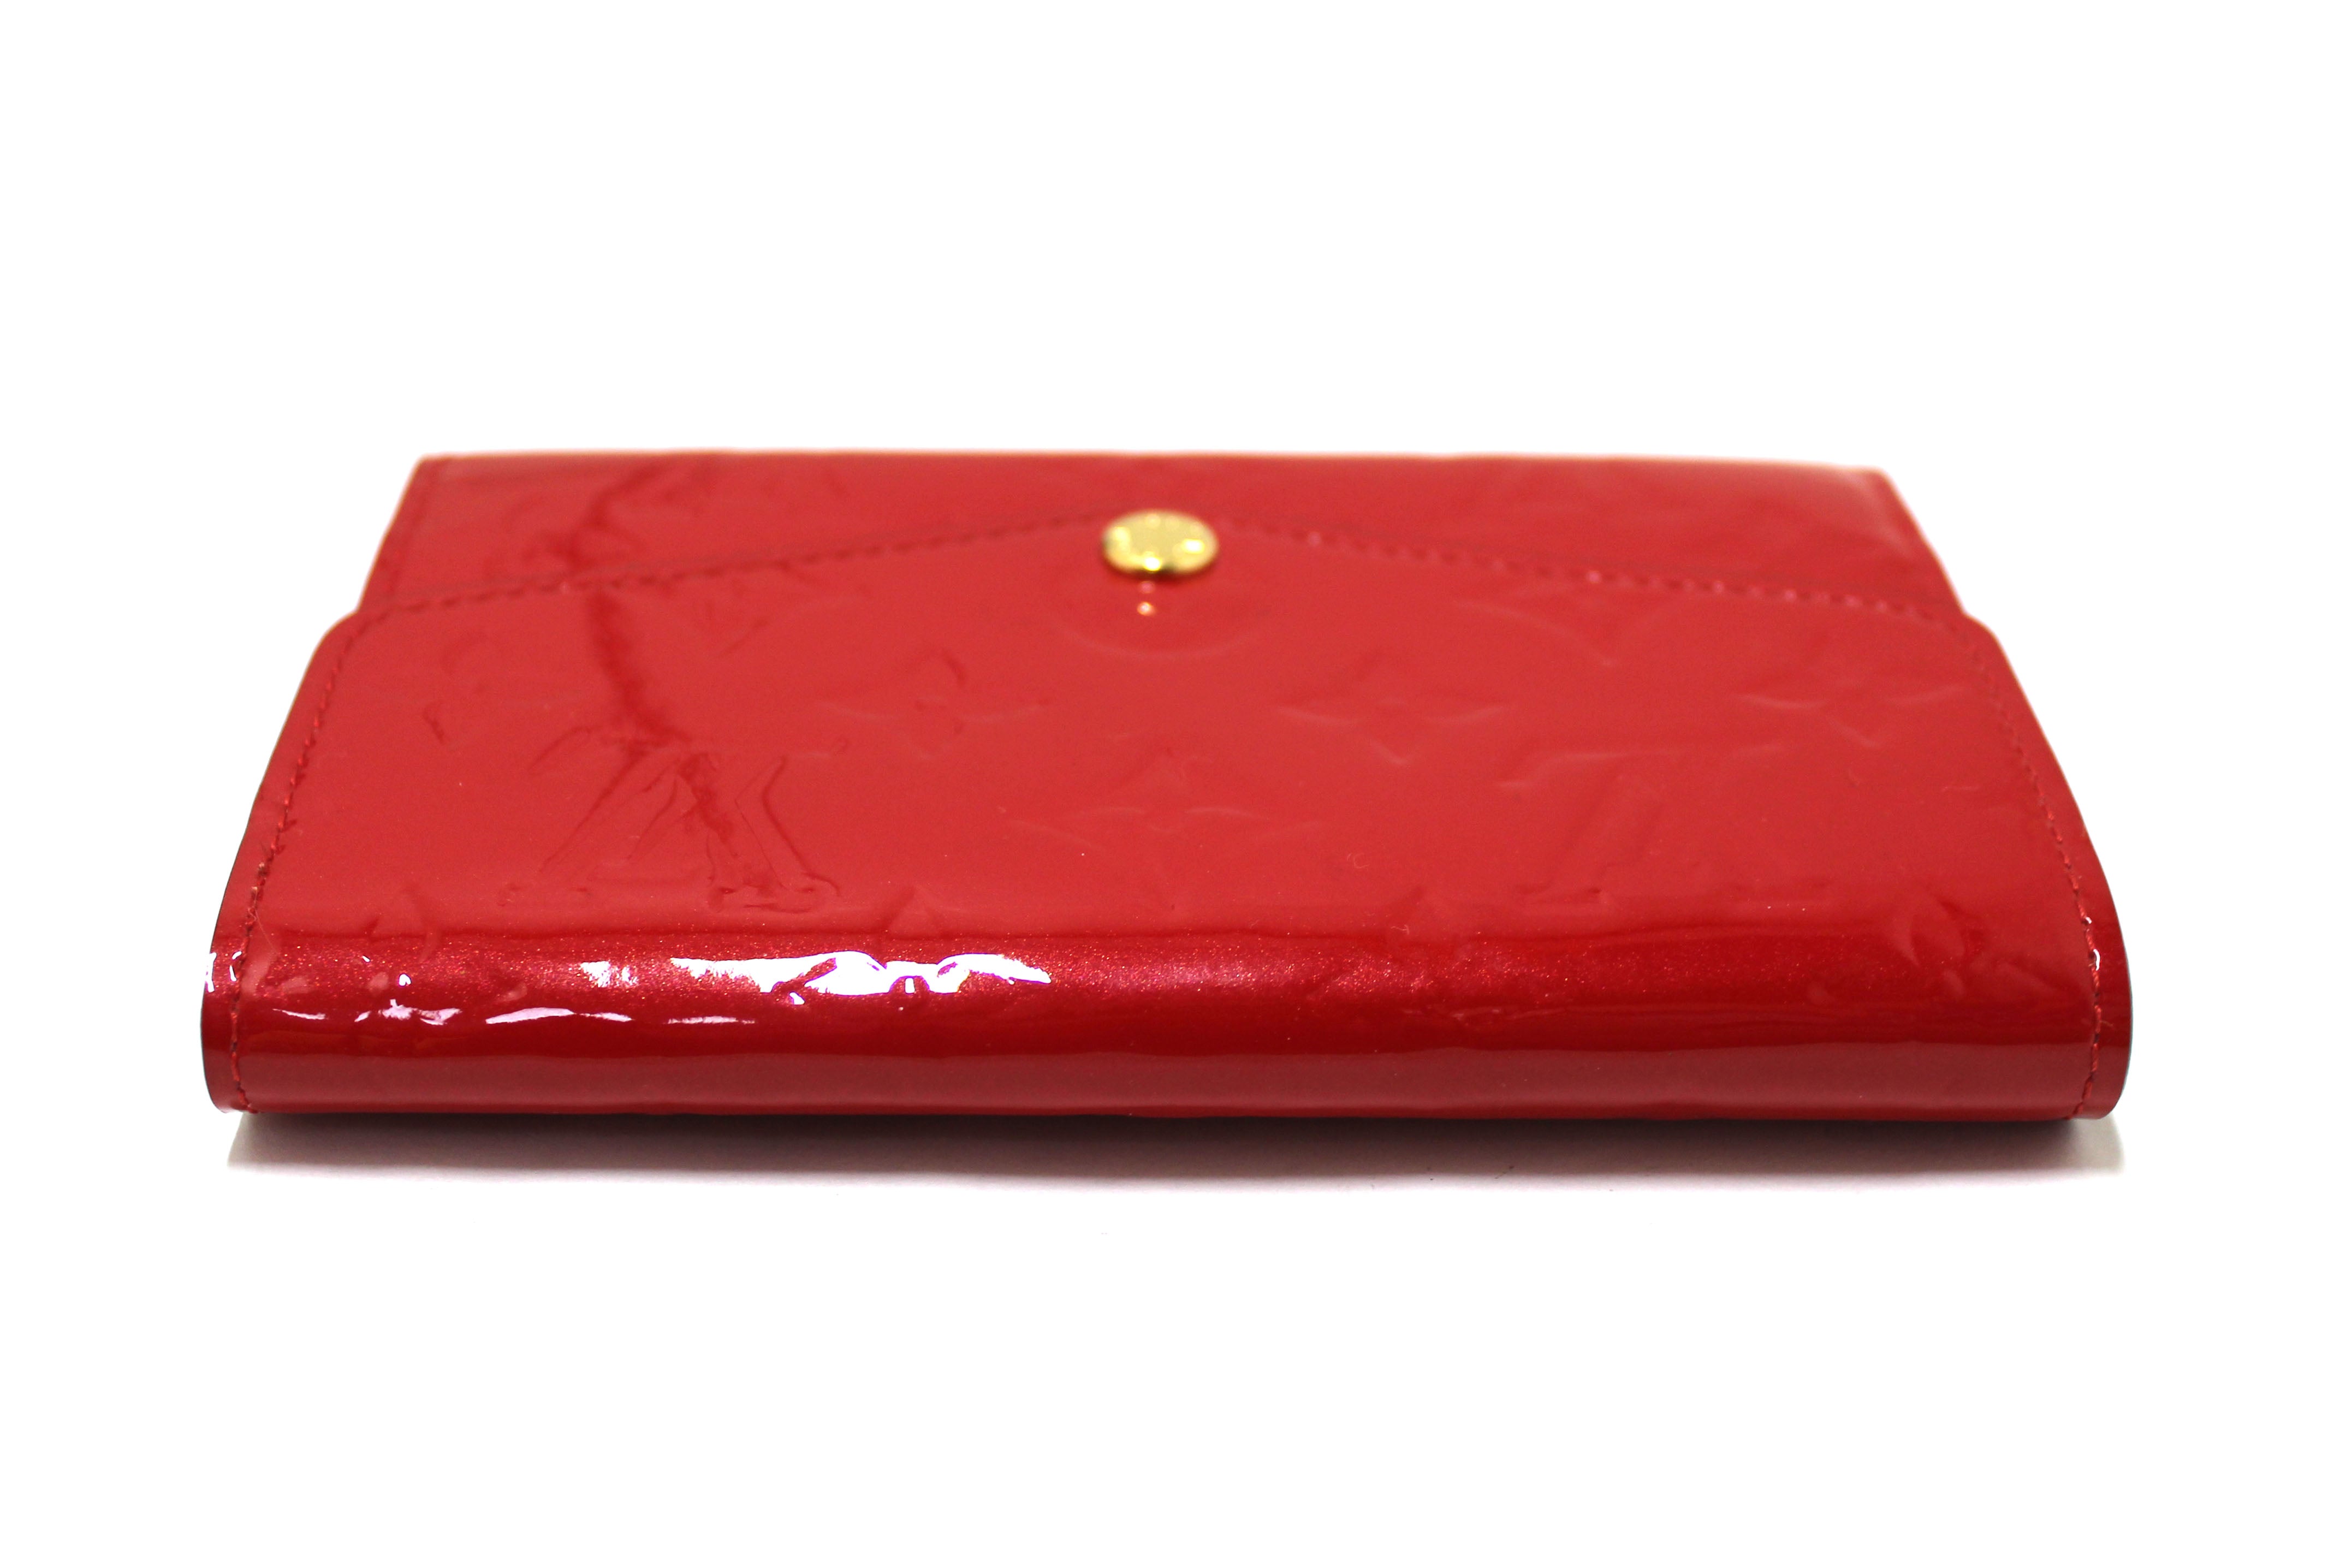 Authentic Louis Vuitton Red Monogram Vernis Patent Leather Compact Curieuse Wallet